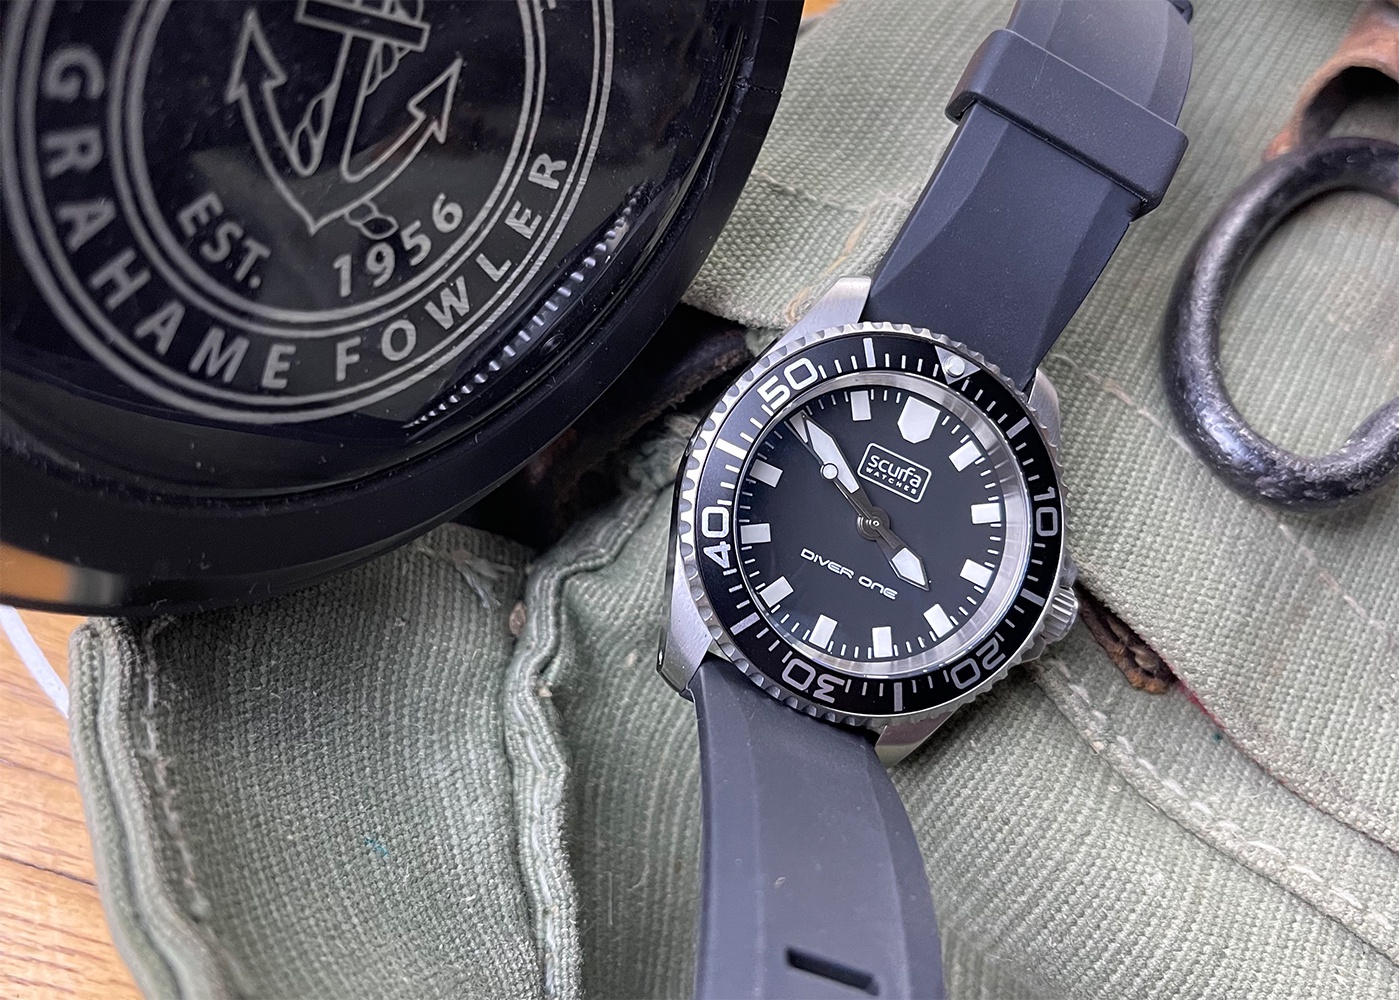 LTD ETD SCURFA FOR GRAHAME FOWLER DIVER ONE MS 20 nyc